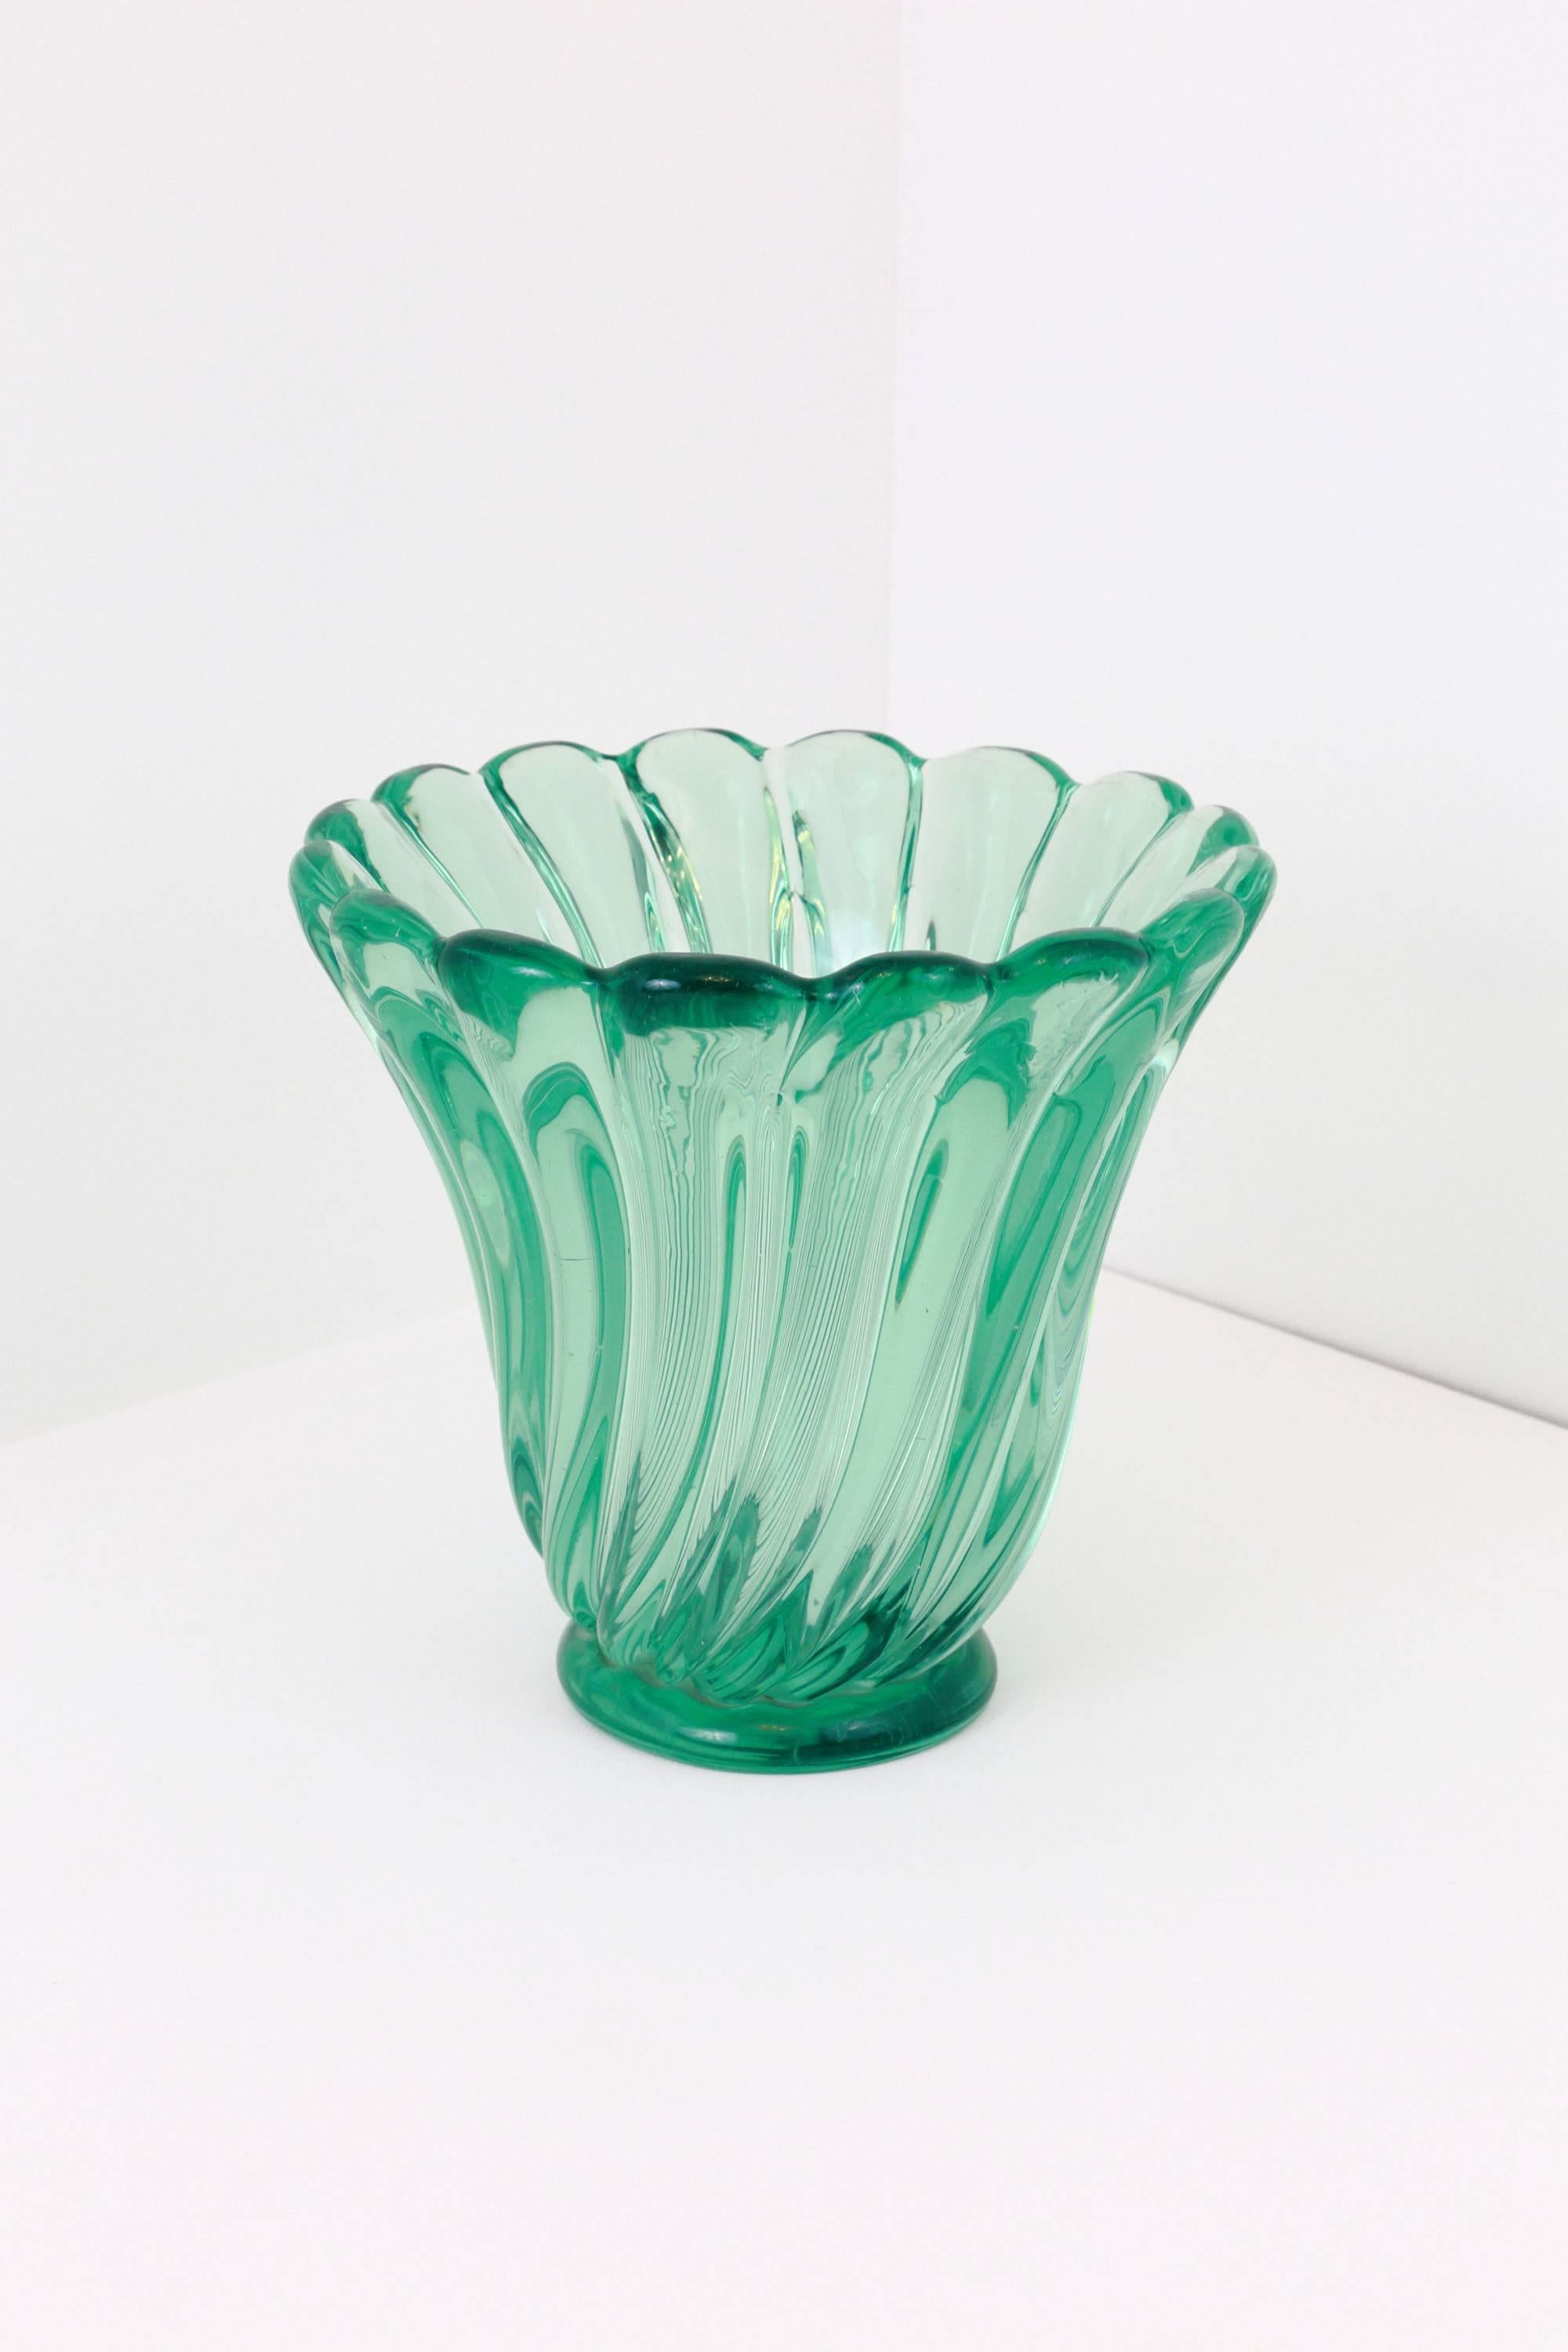 An amazing piece of Murano craftsmanship, this large and very heavy emerald green vase was produced by Seguso in the 1950s. The vase features a wonderful 'swirl' pattern which captures the light beautifully giving it movement. The color and clarity